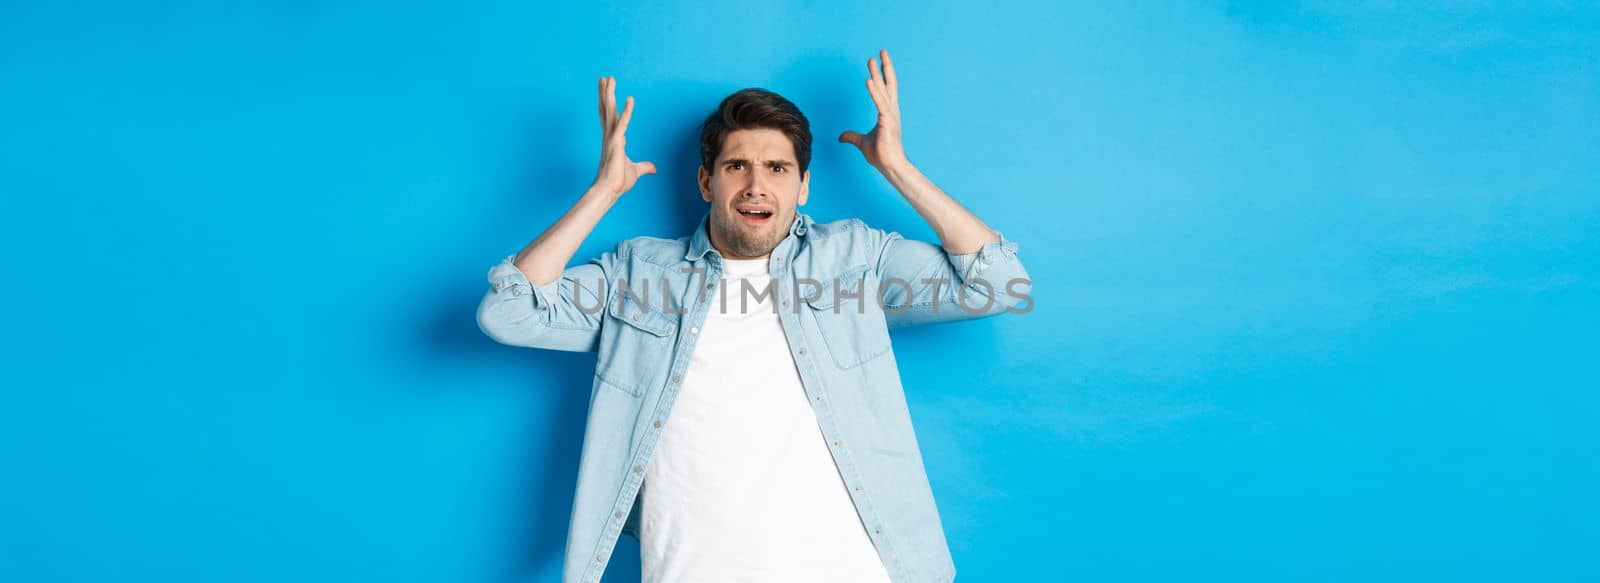 Confused and bothered man holding hands near head, looking frustrated, standing upset against blue background.